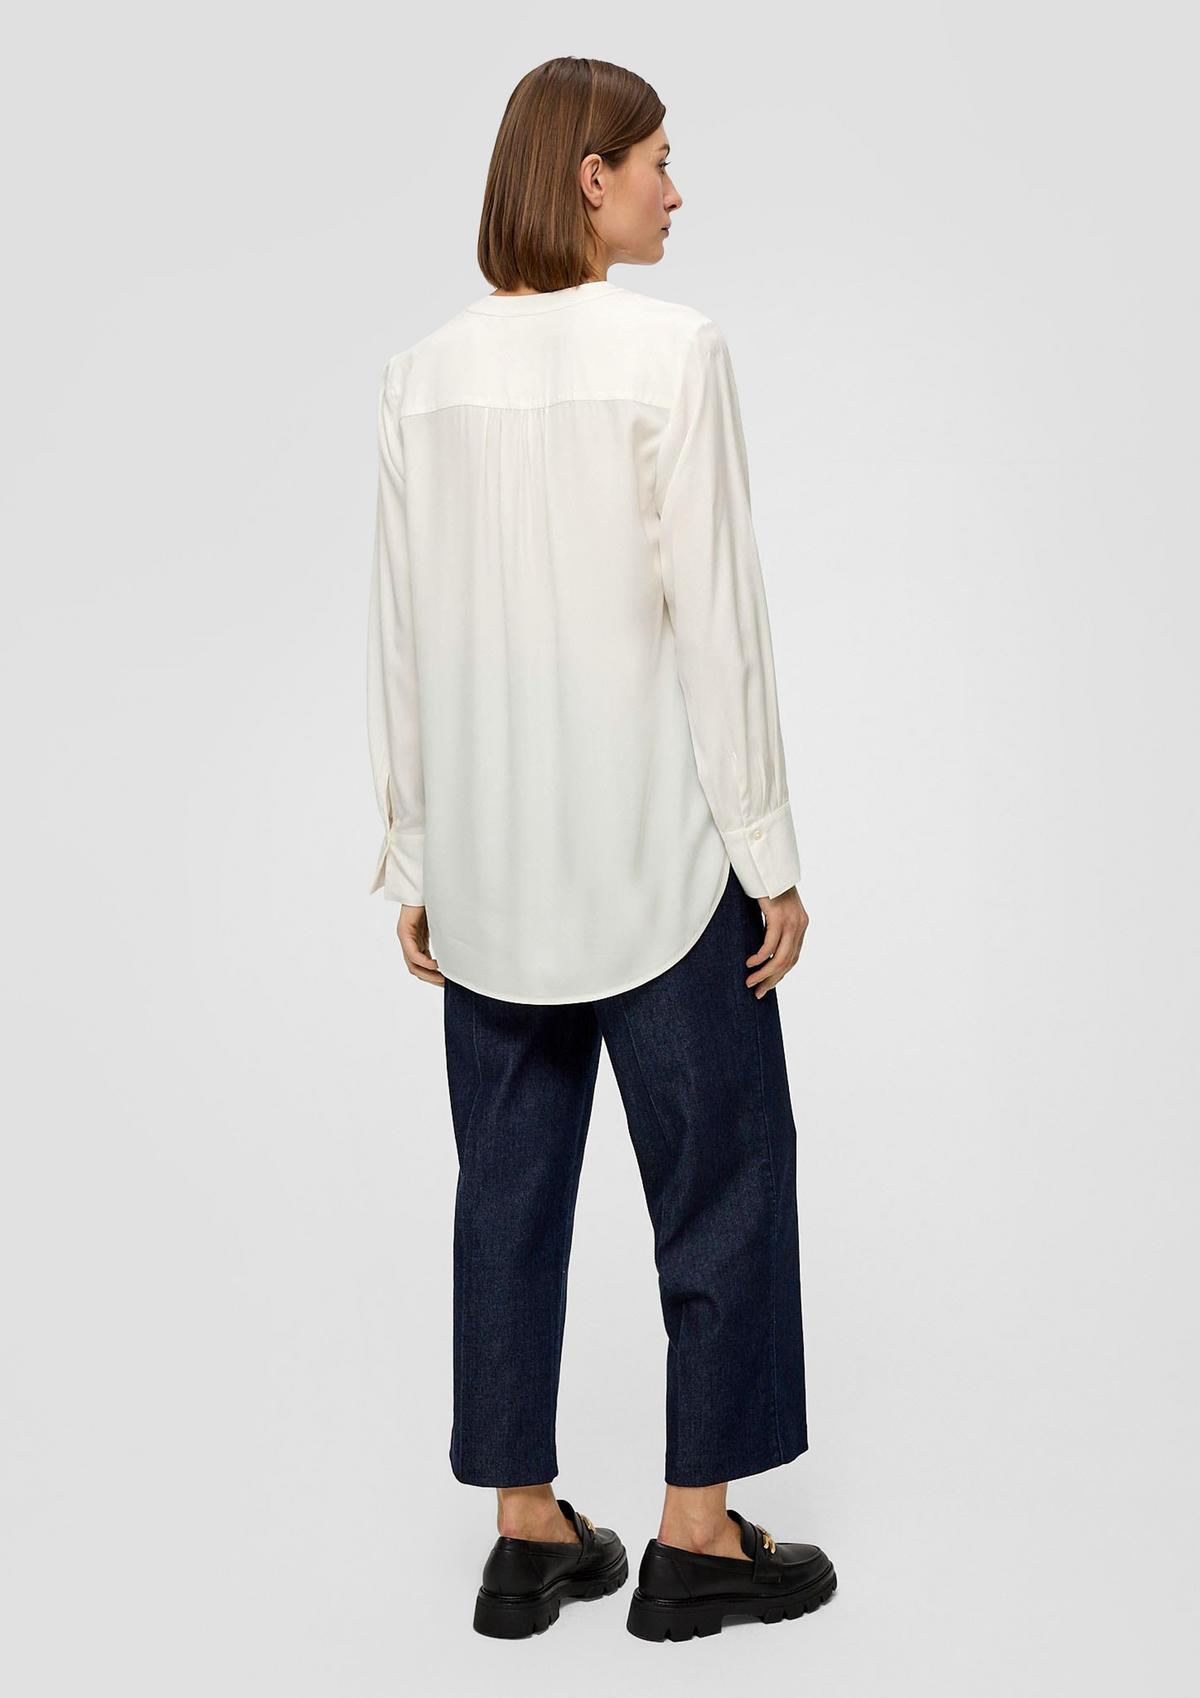 s.Oliver Blouse made of flowing woven fabric